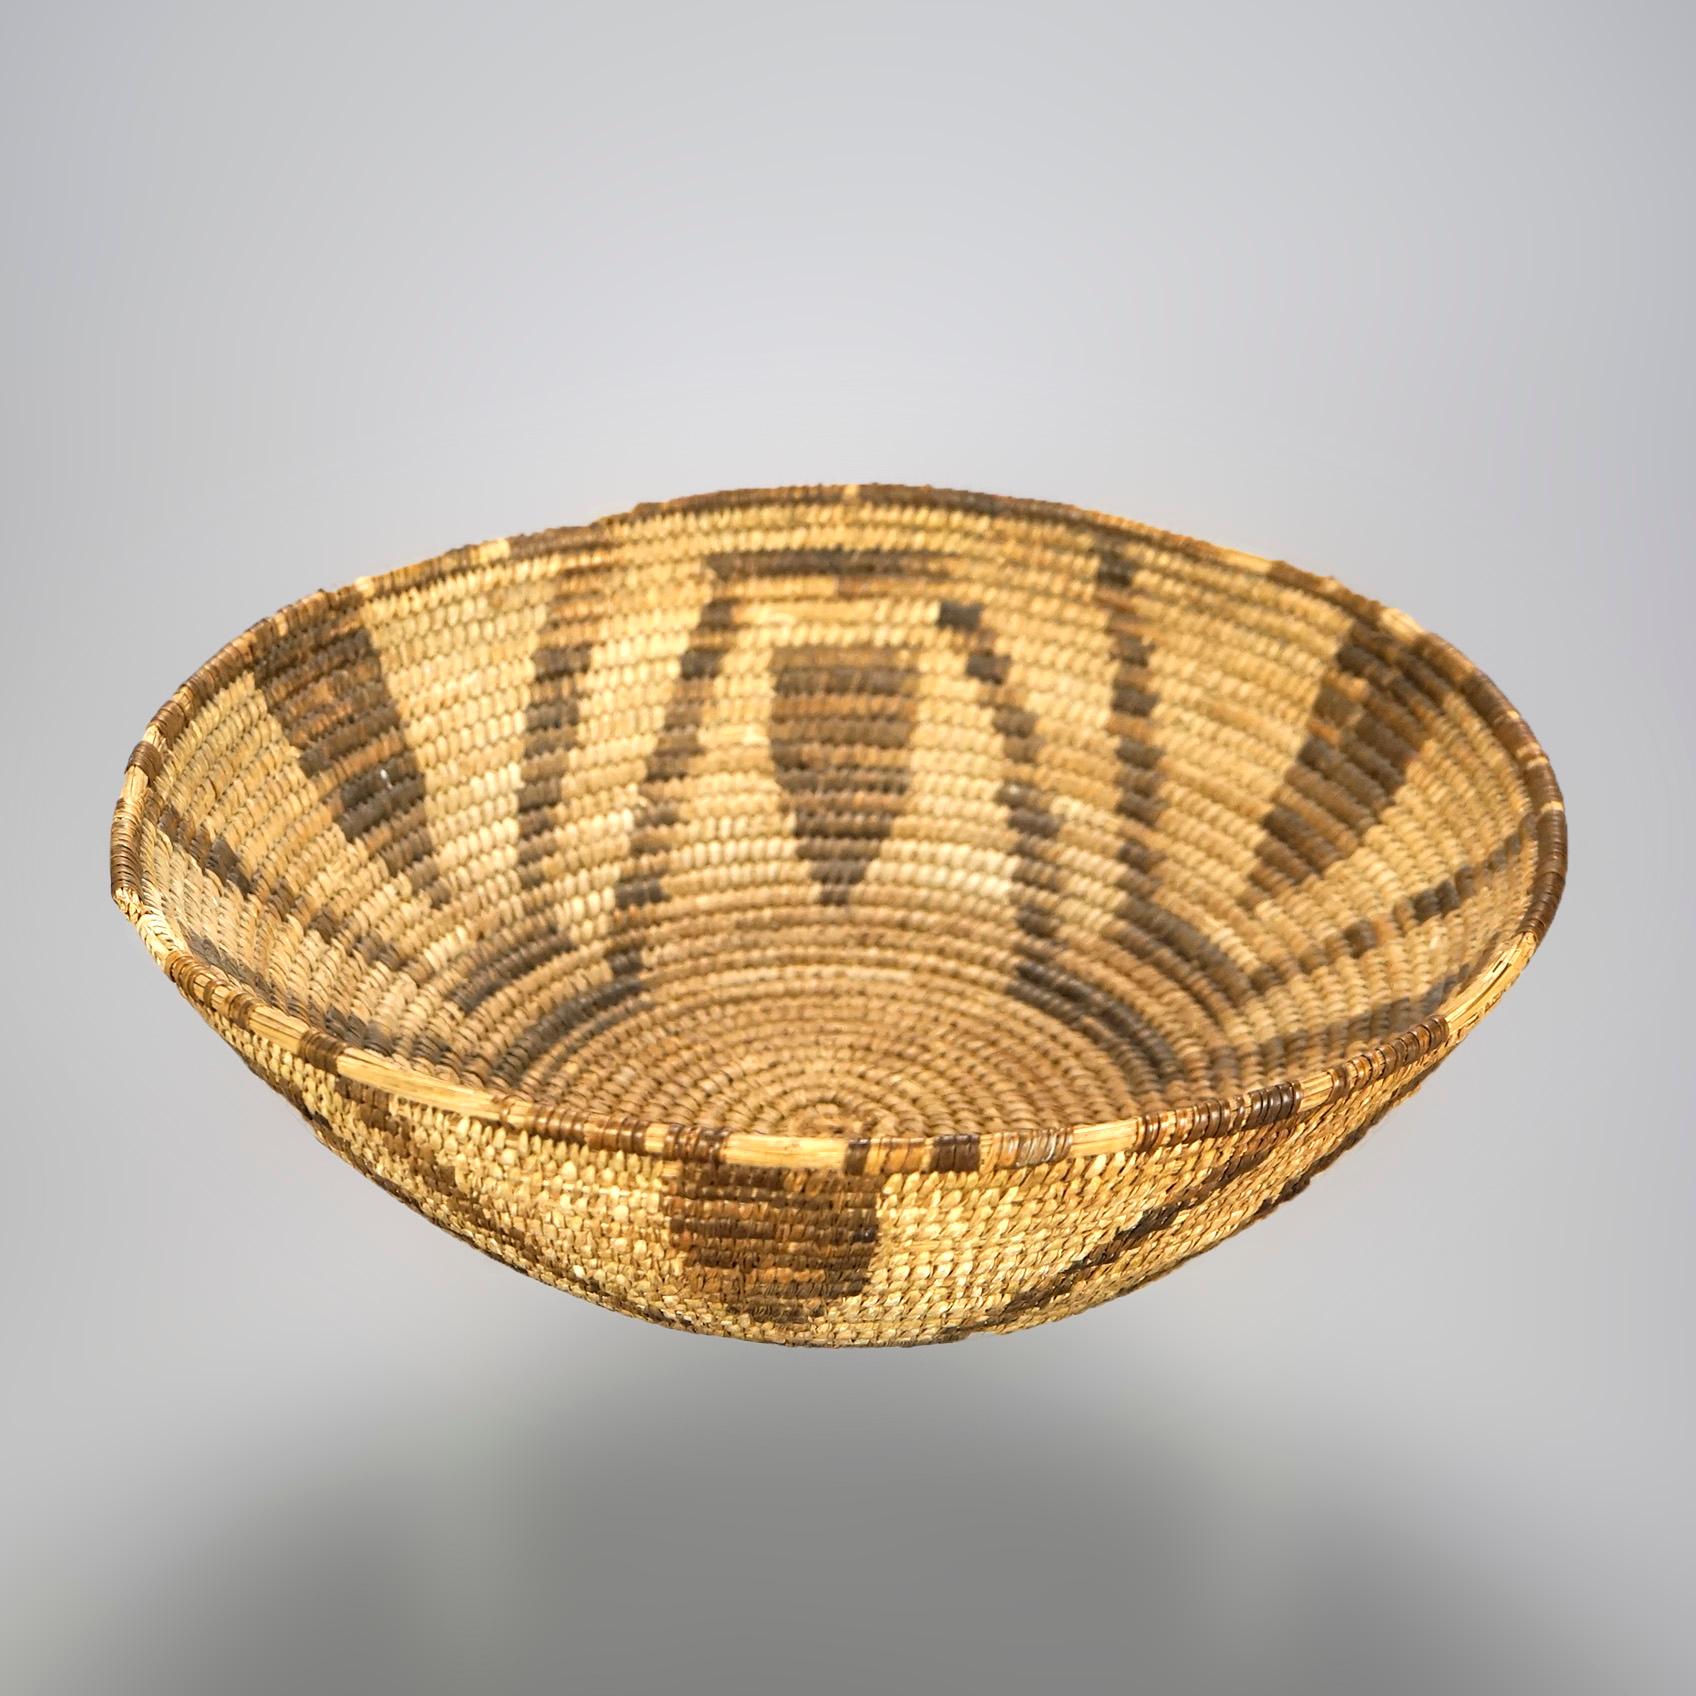 Hand-Woven Antique Southwestern American Indian Basket with Geometric Design c1920